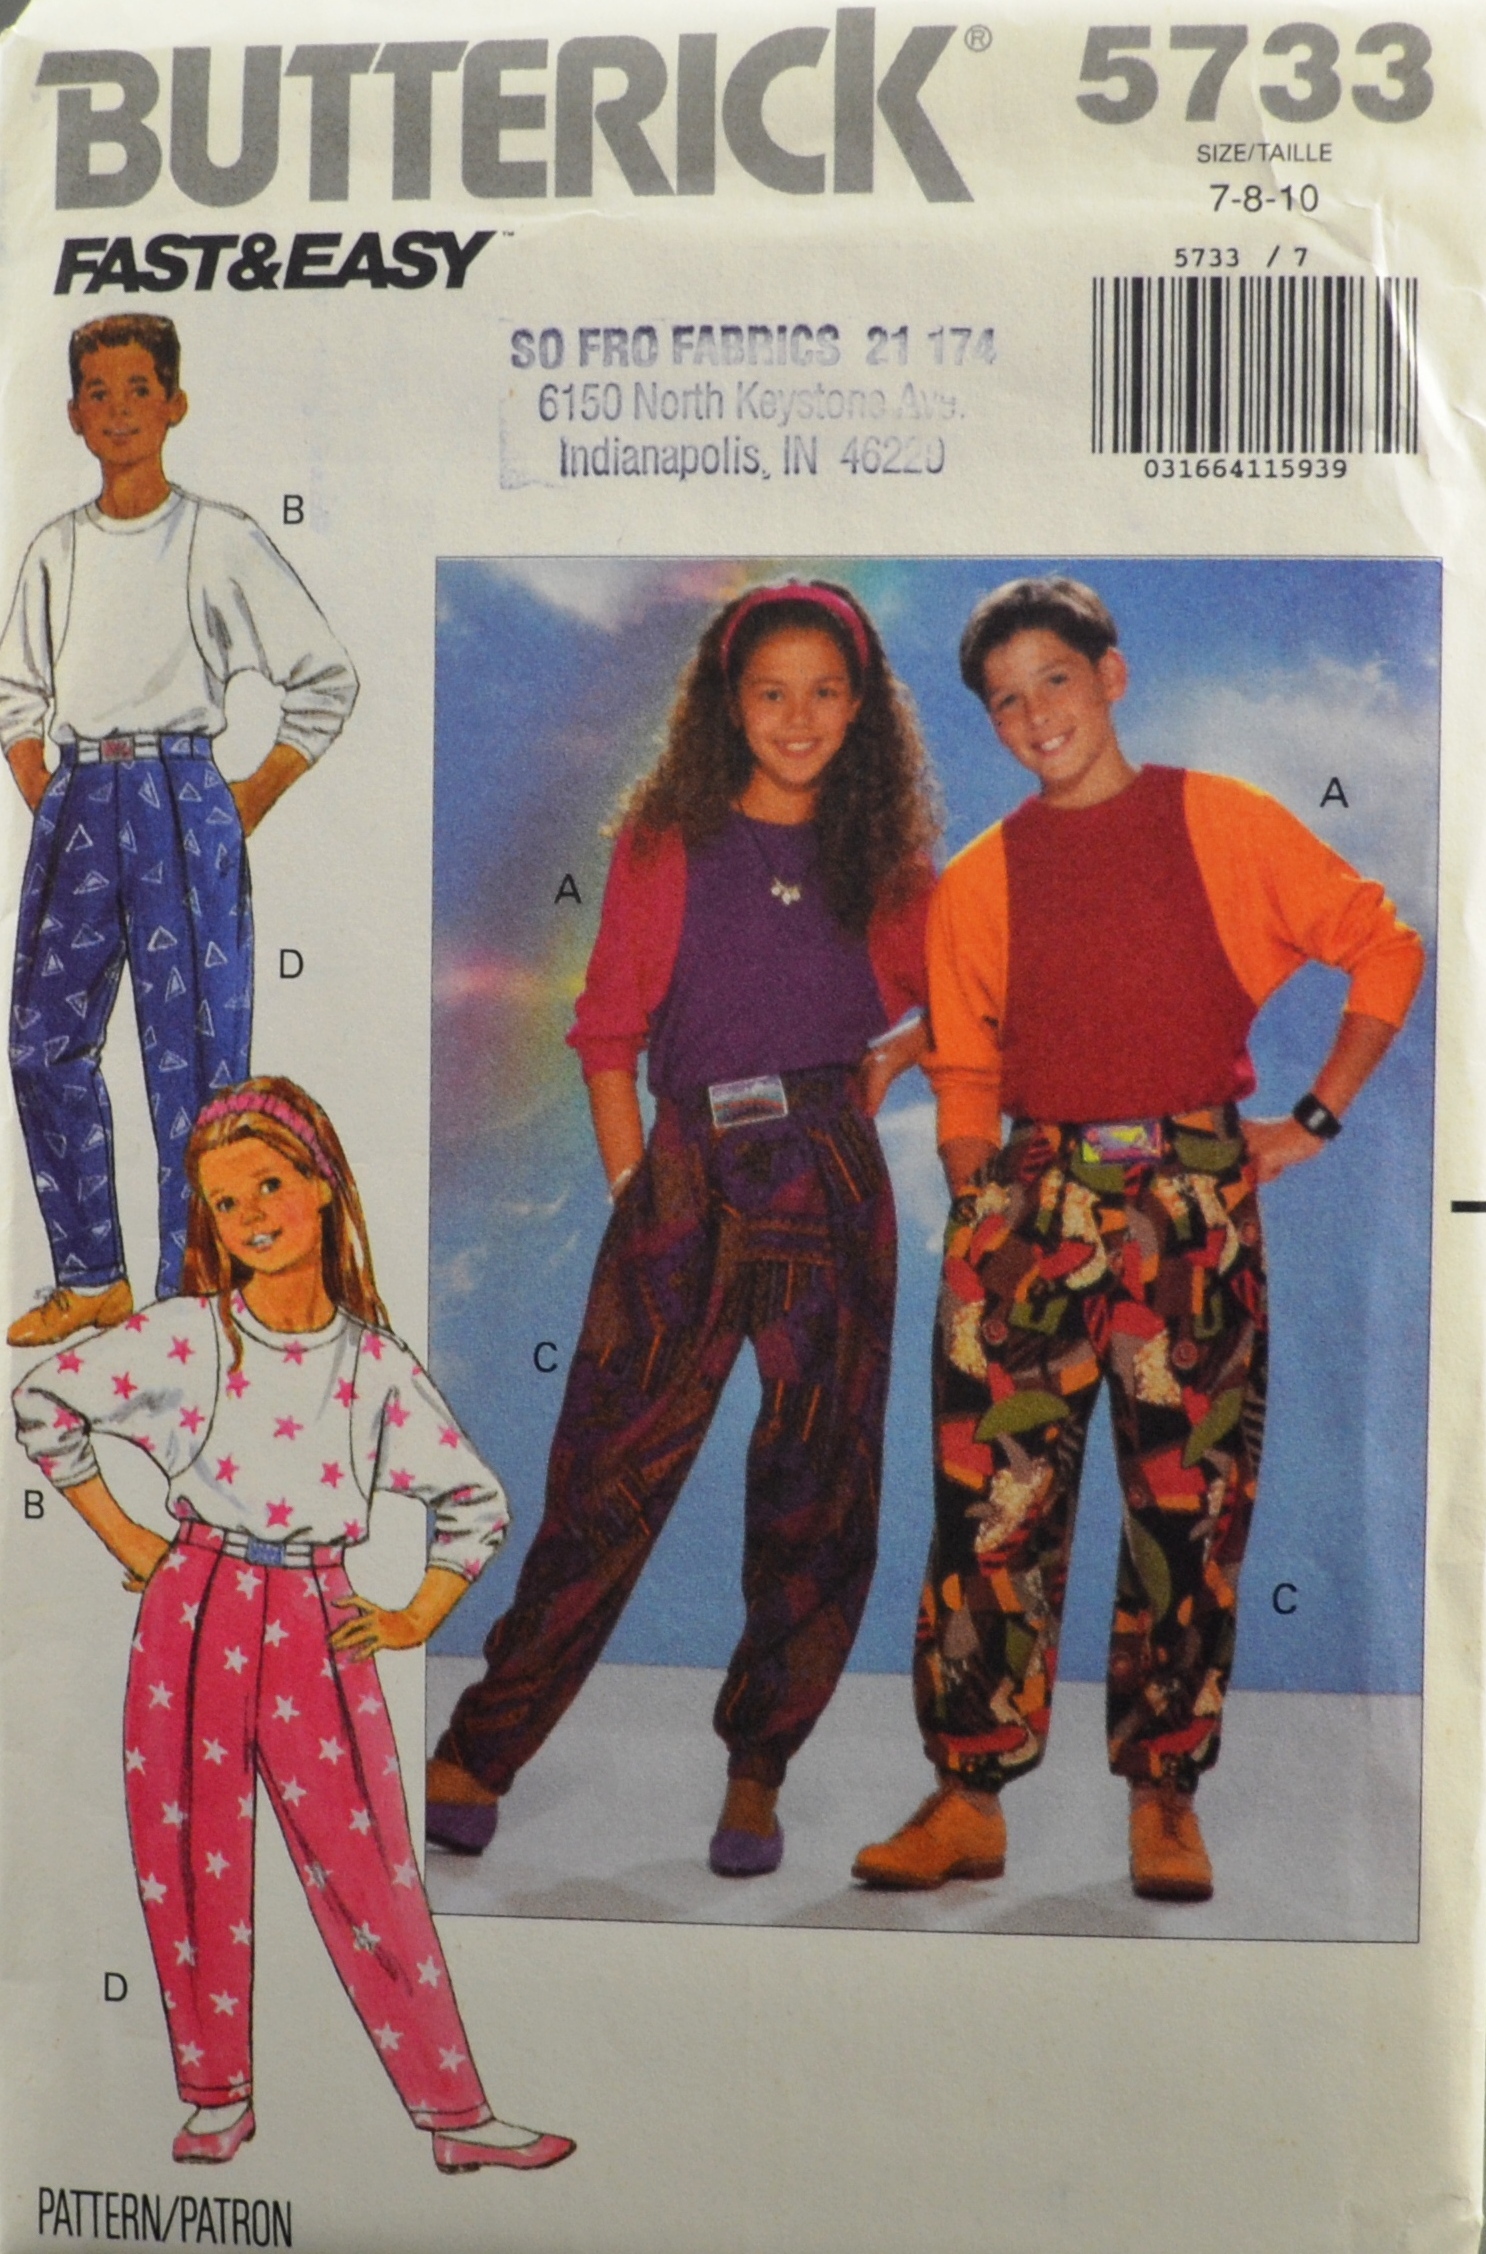 Butterick Sewing Pattern 3955 Girls' Pants - 6 Styles, Size 6-7-8 by  Butterick : Amazon.in: Clothing & Accessories